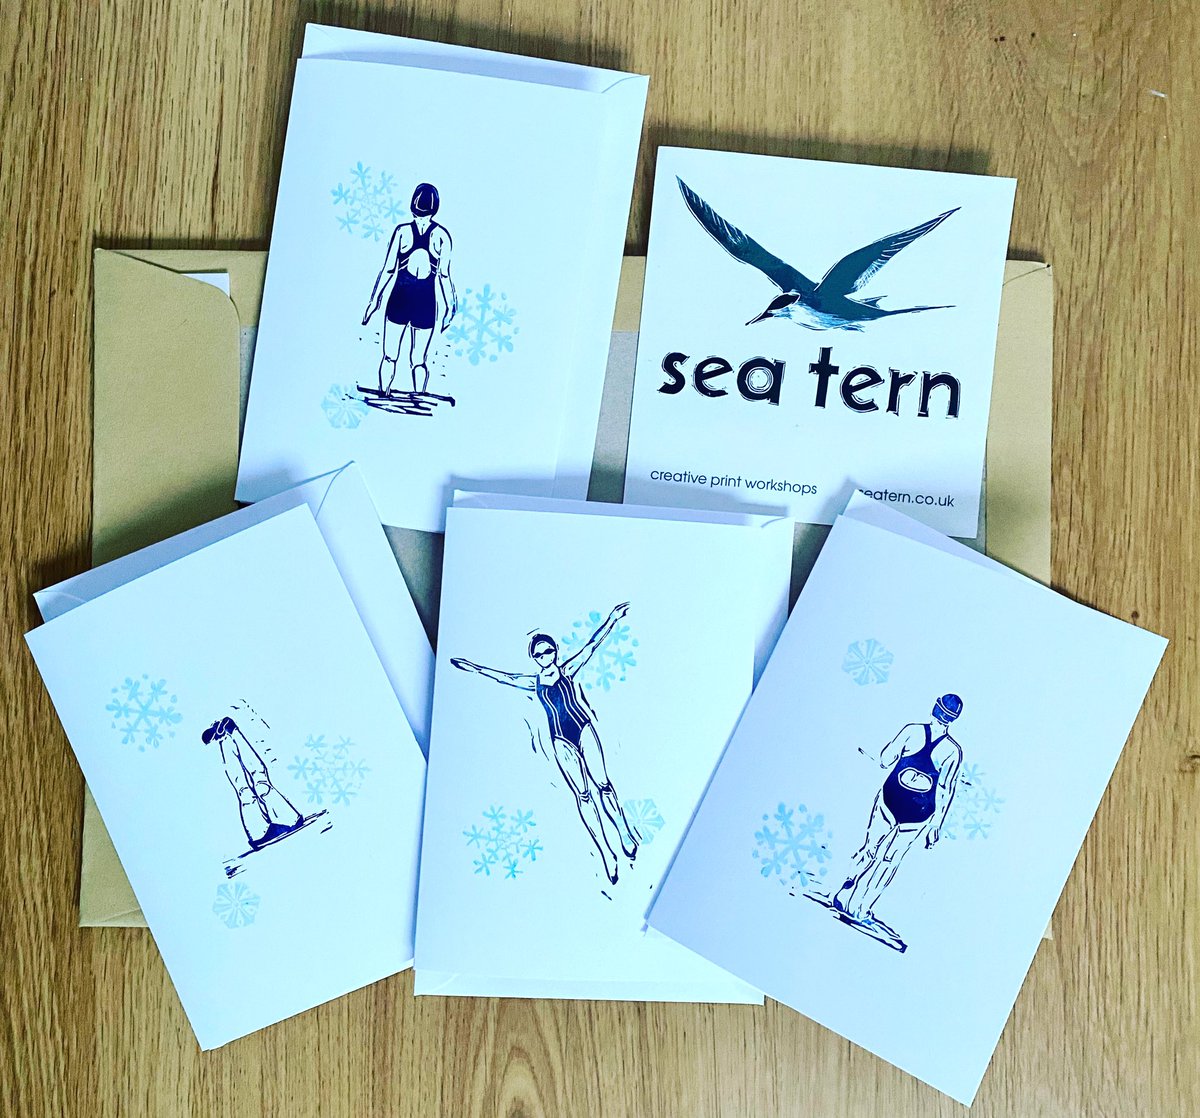 Another batch of sea swimmer festive cards on their way! Thanks for your continued support 🥰💙 Available from seatern.co.uk/shop 👍 #SeaSwimmer #FestiveCards #Handprinted #OriginalPrints #SeaTernPrint